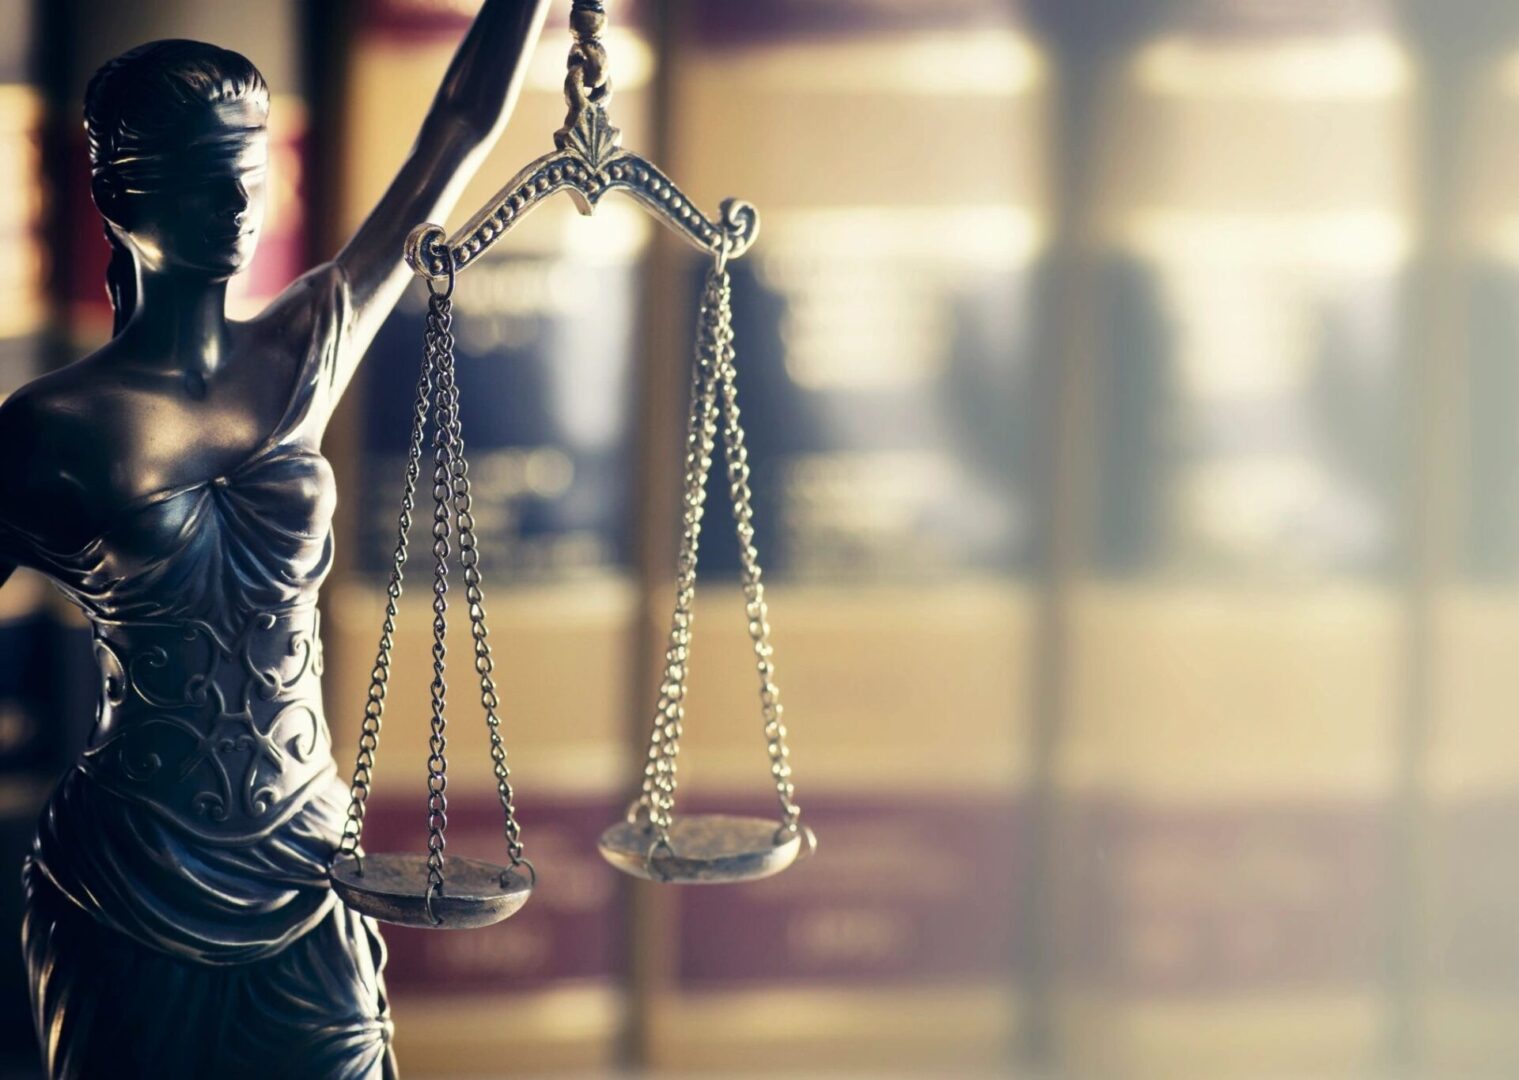 Legal Law Concept Image, Scales of Justice, State Books